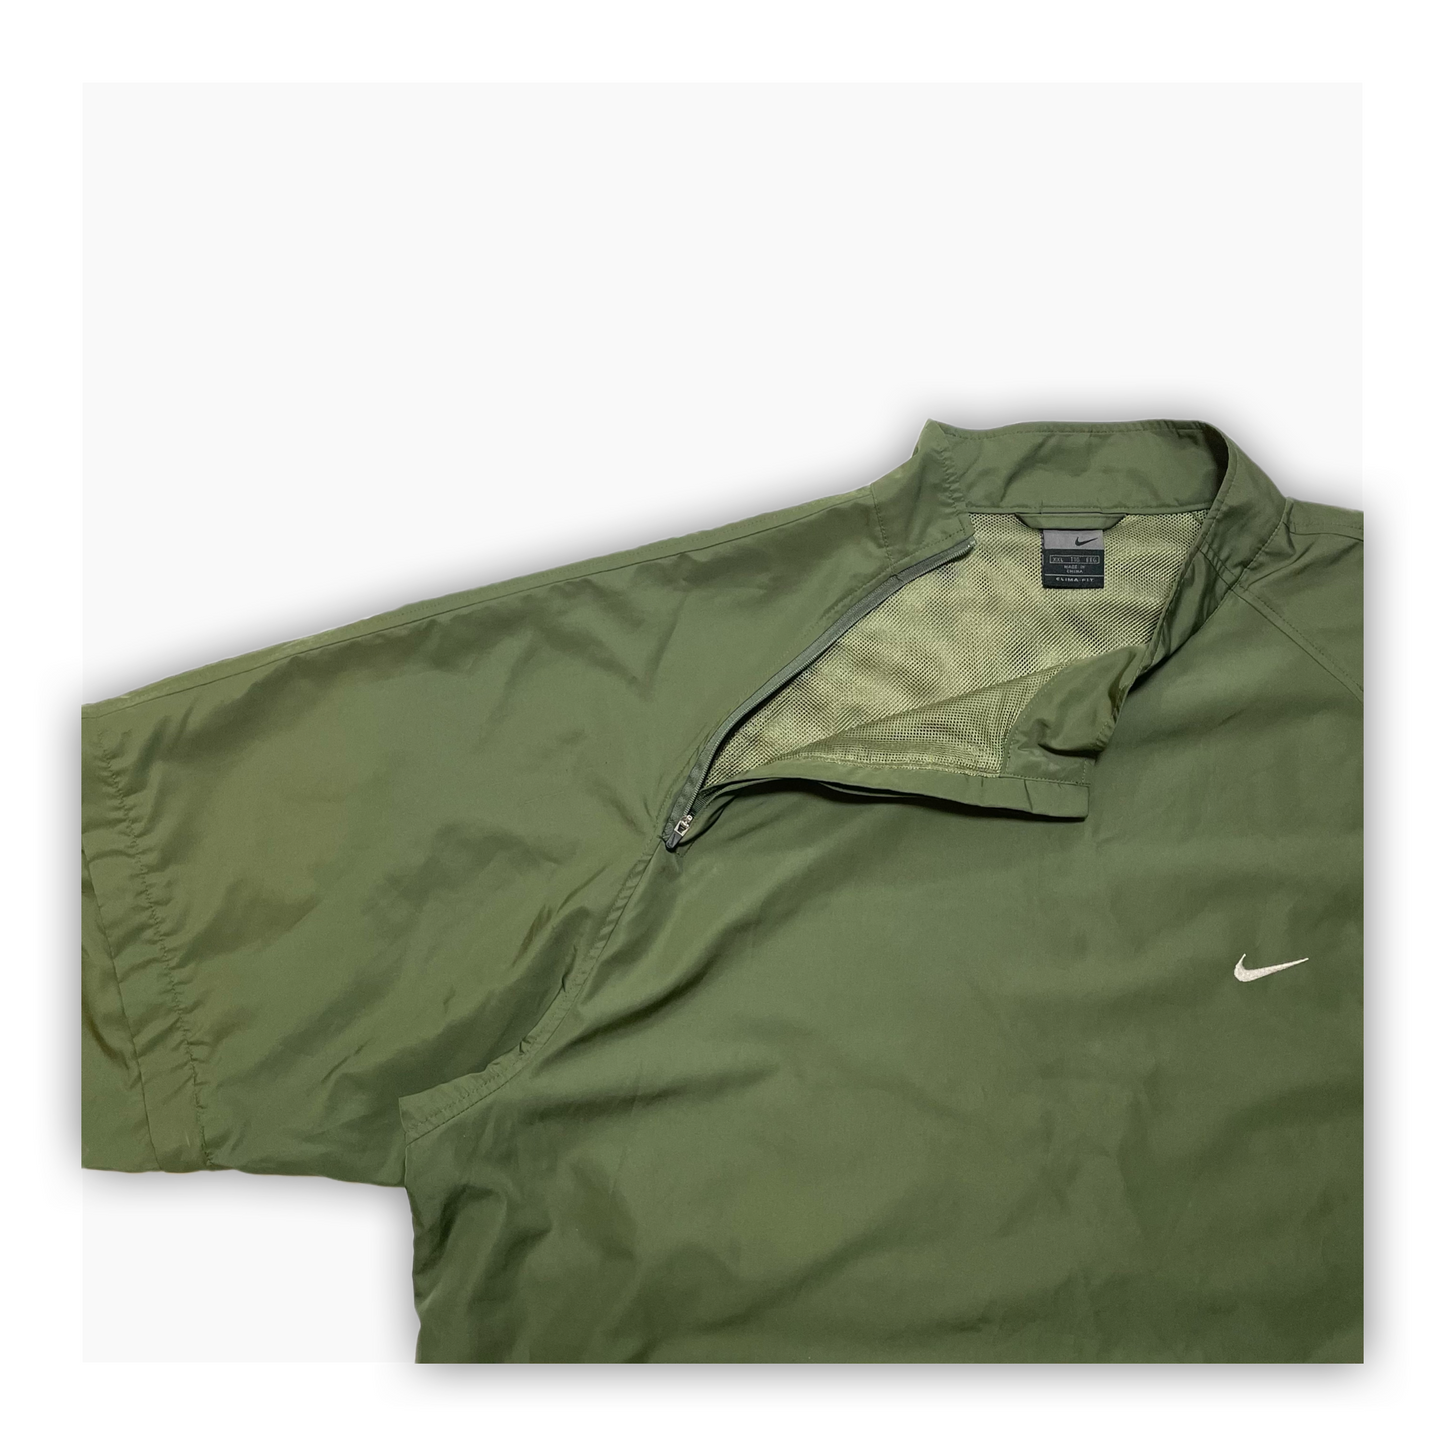 NIKE CLAIMA-FIT Asymmetric Zip Pullover Jacket